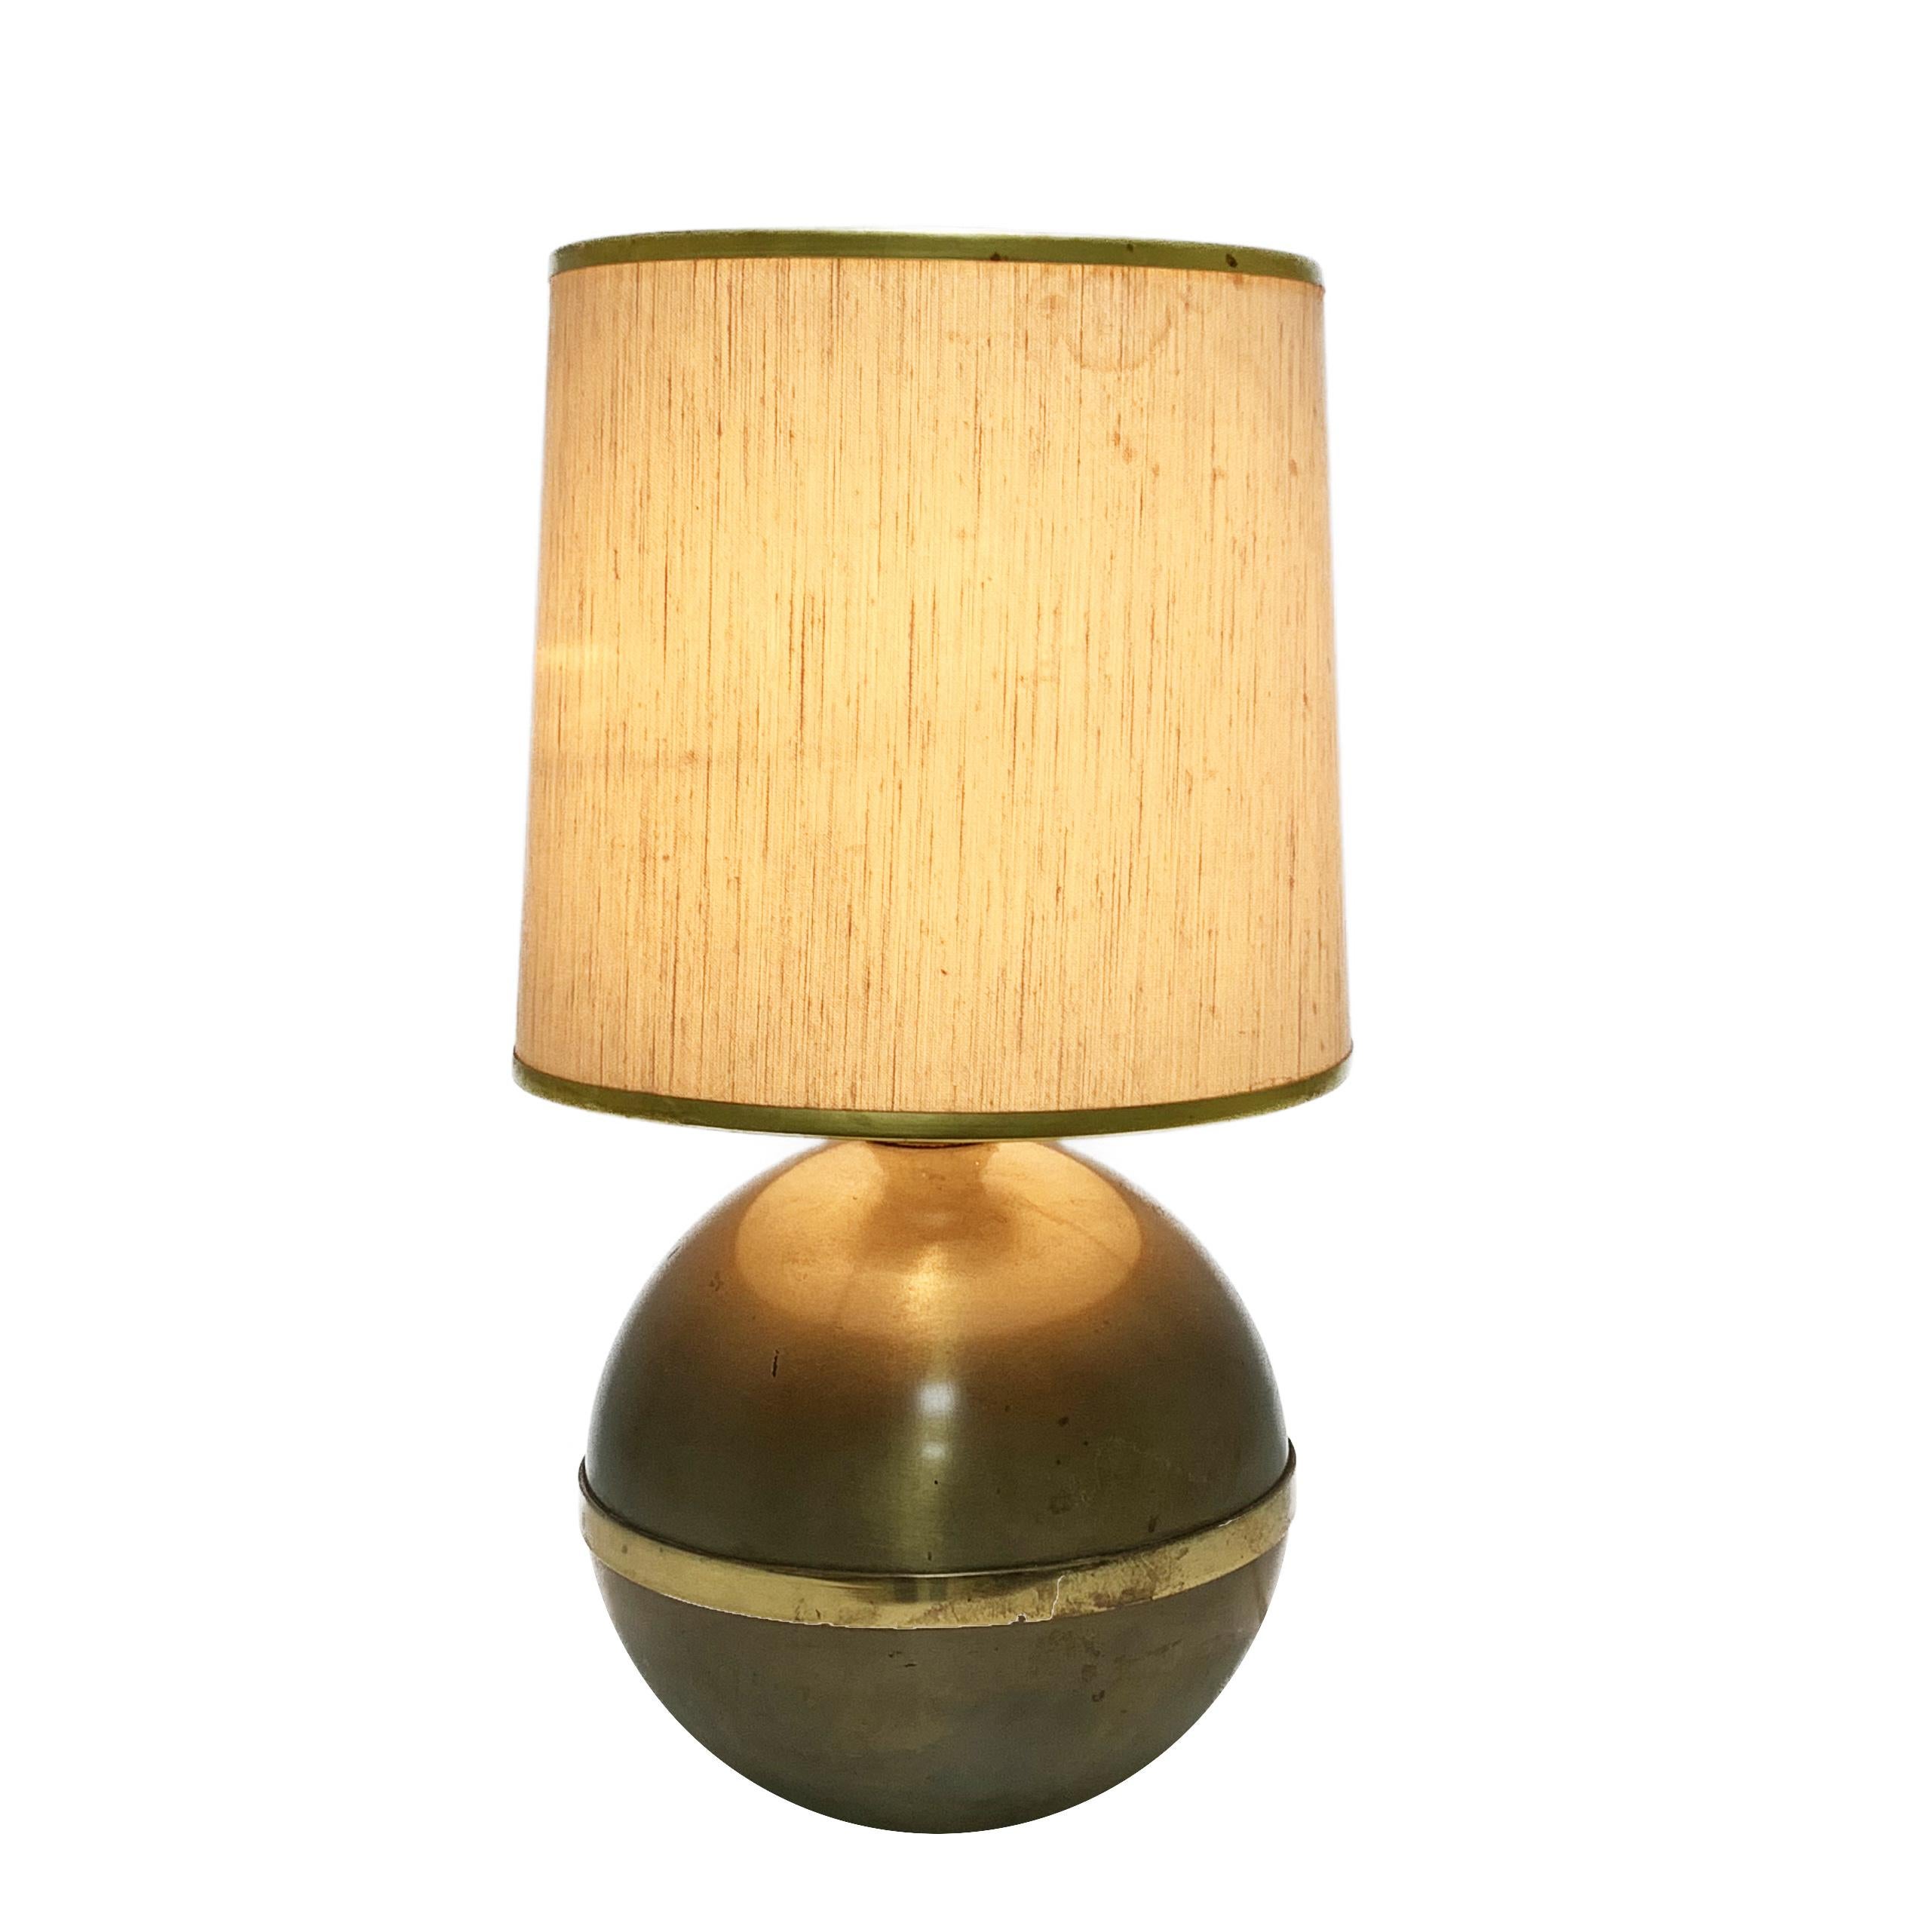 This large table light was designed and produced by Reggiani in the 1970s. It has a spherical base in metal and brass, and features the original shade.